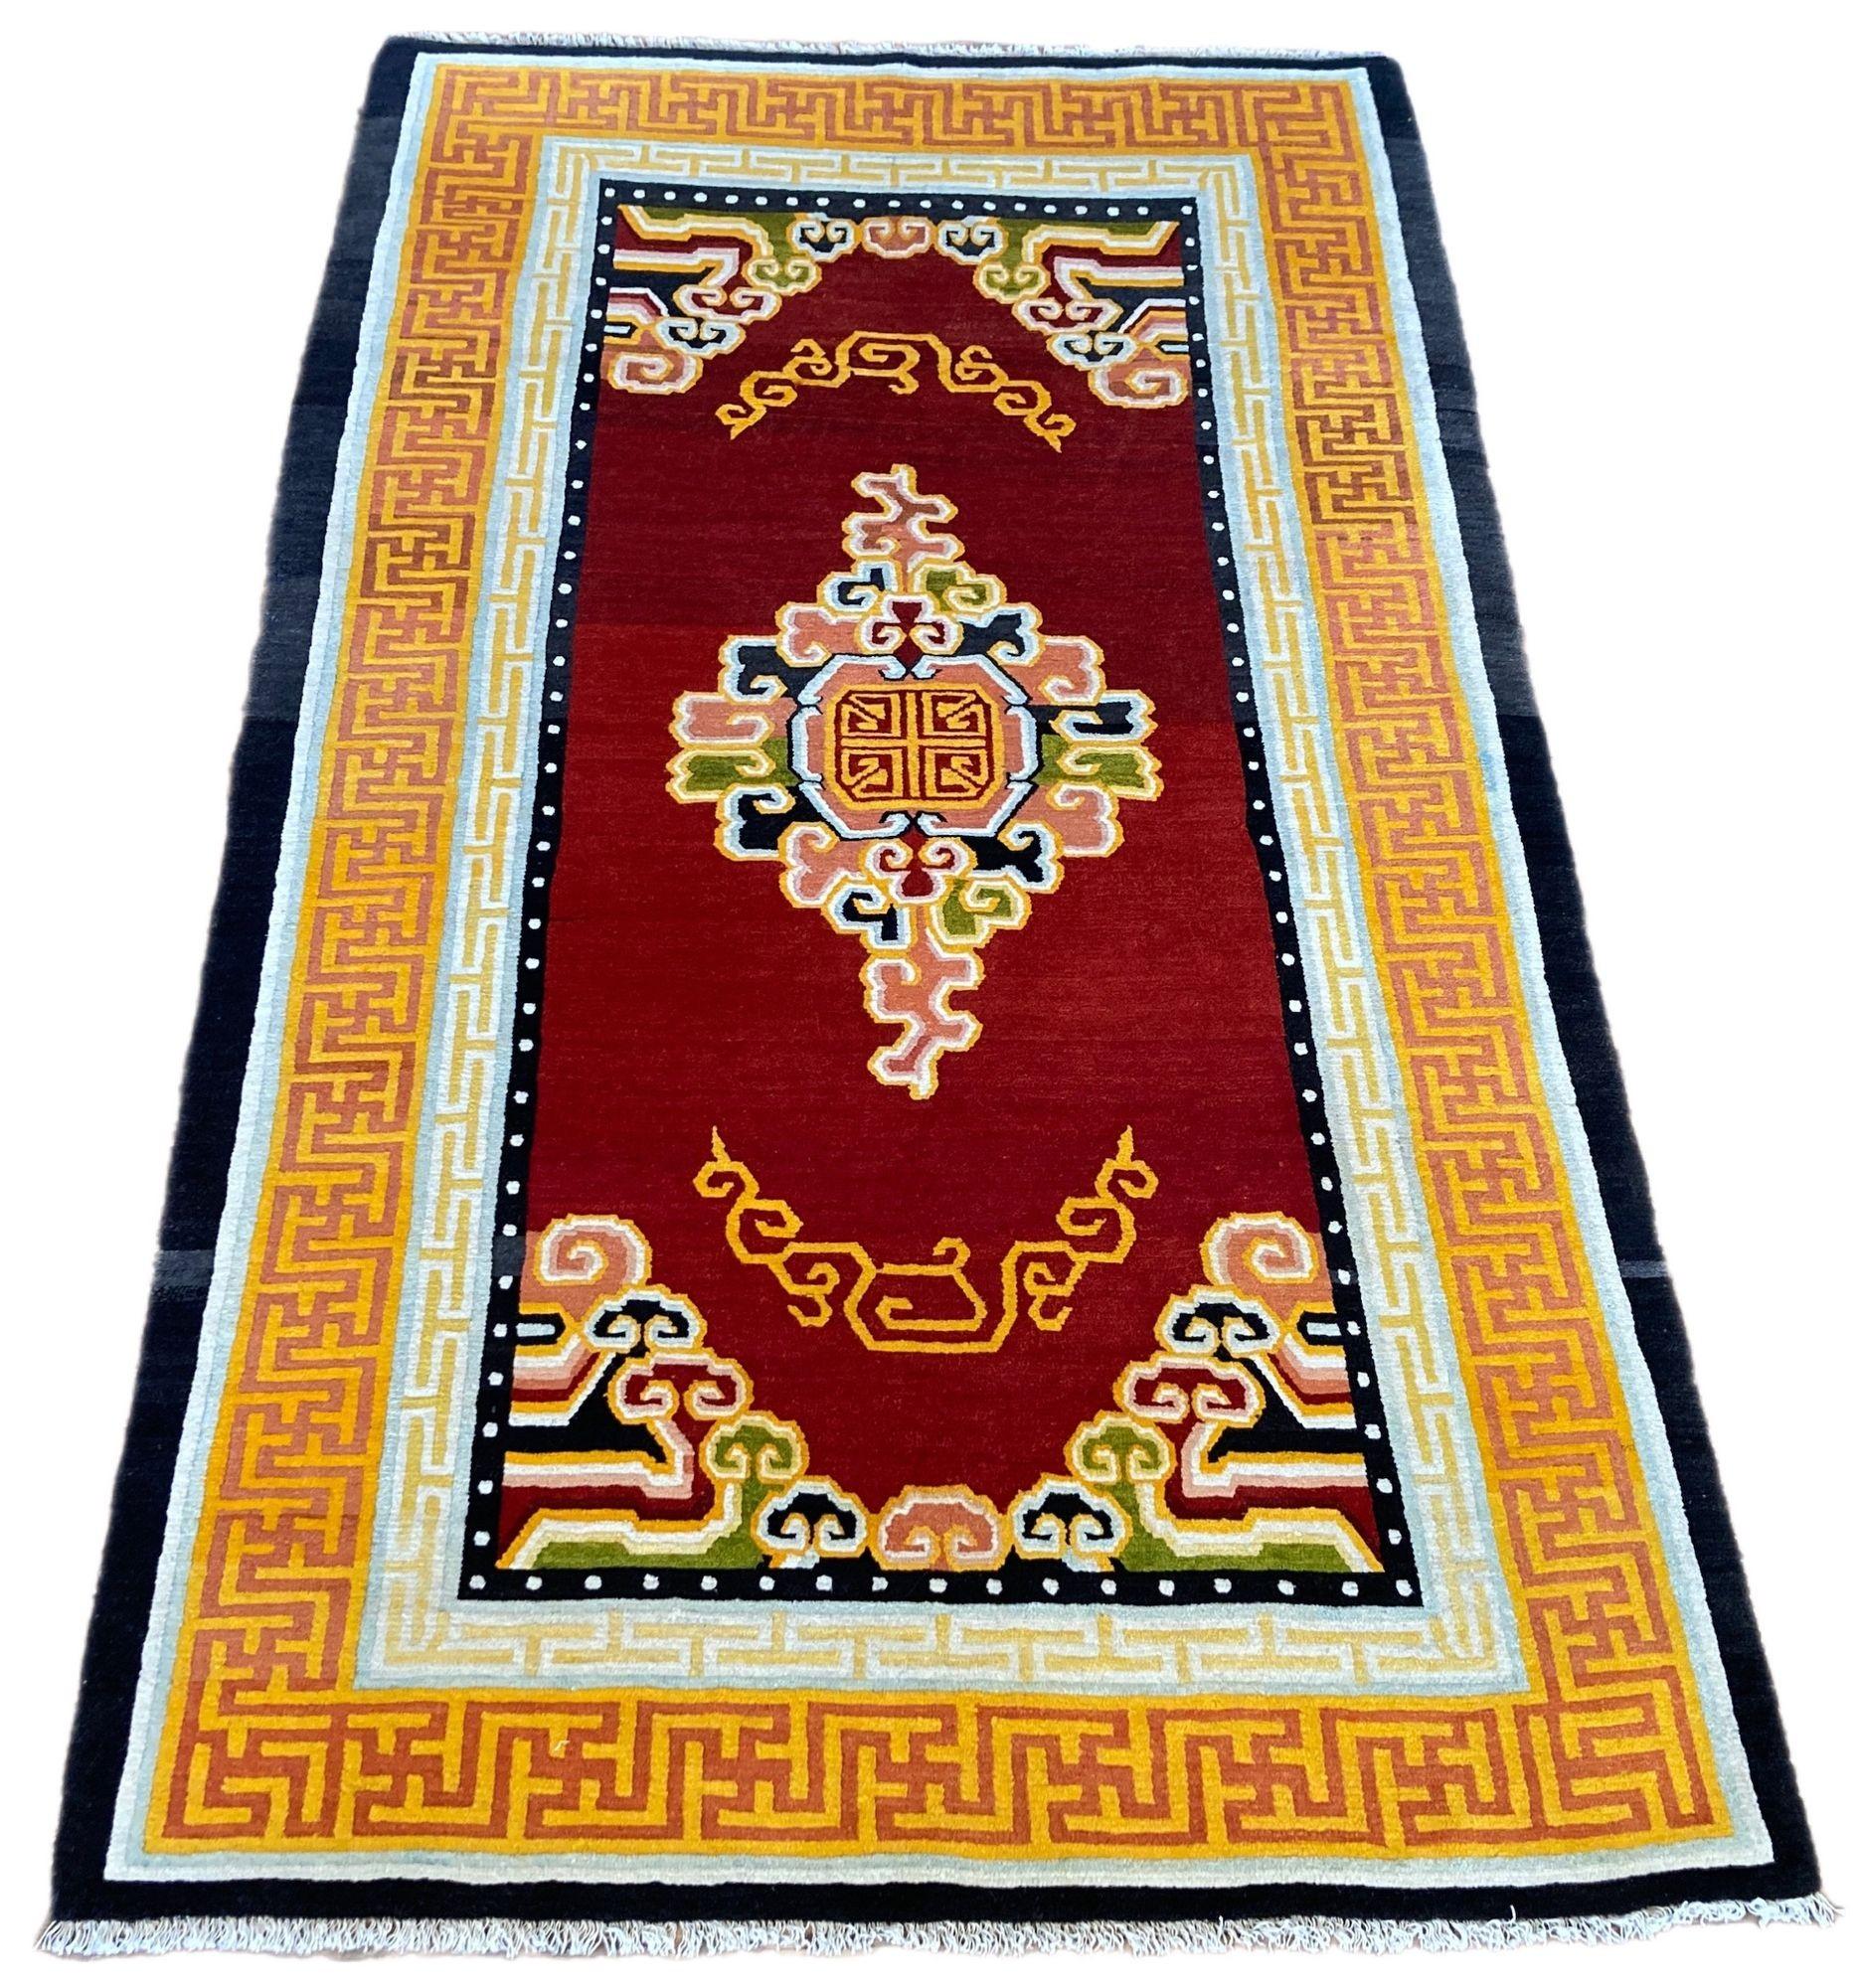 A fabulous 1930’s Tibetan rug with a simple cloudband design on an open red field surrounded by a red and gold key border. Lovely wool quality and great colours!
Size: 2.12m x 1.24m (7ft x 4ft 1in)
This rug is in good overall condition with very